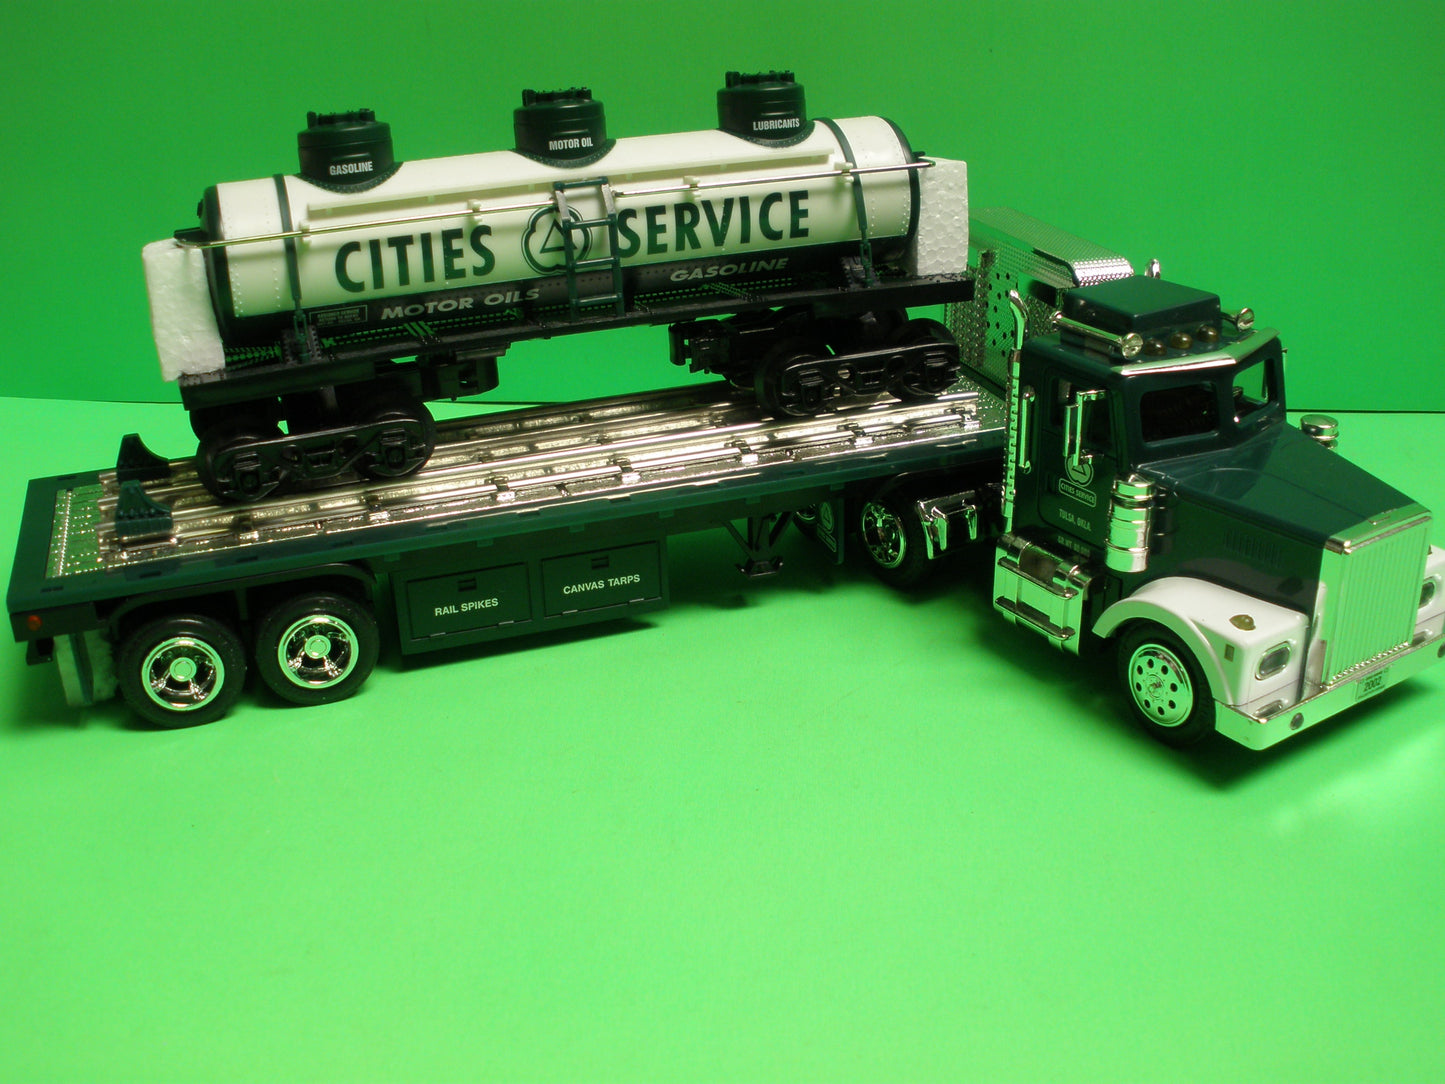 2002 Cities Services Flatbed Truck with 3 Dome Tanker Car